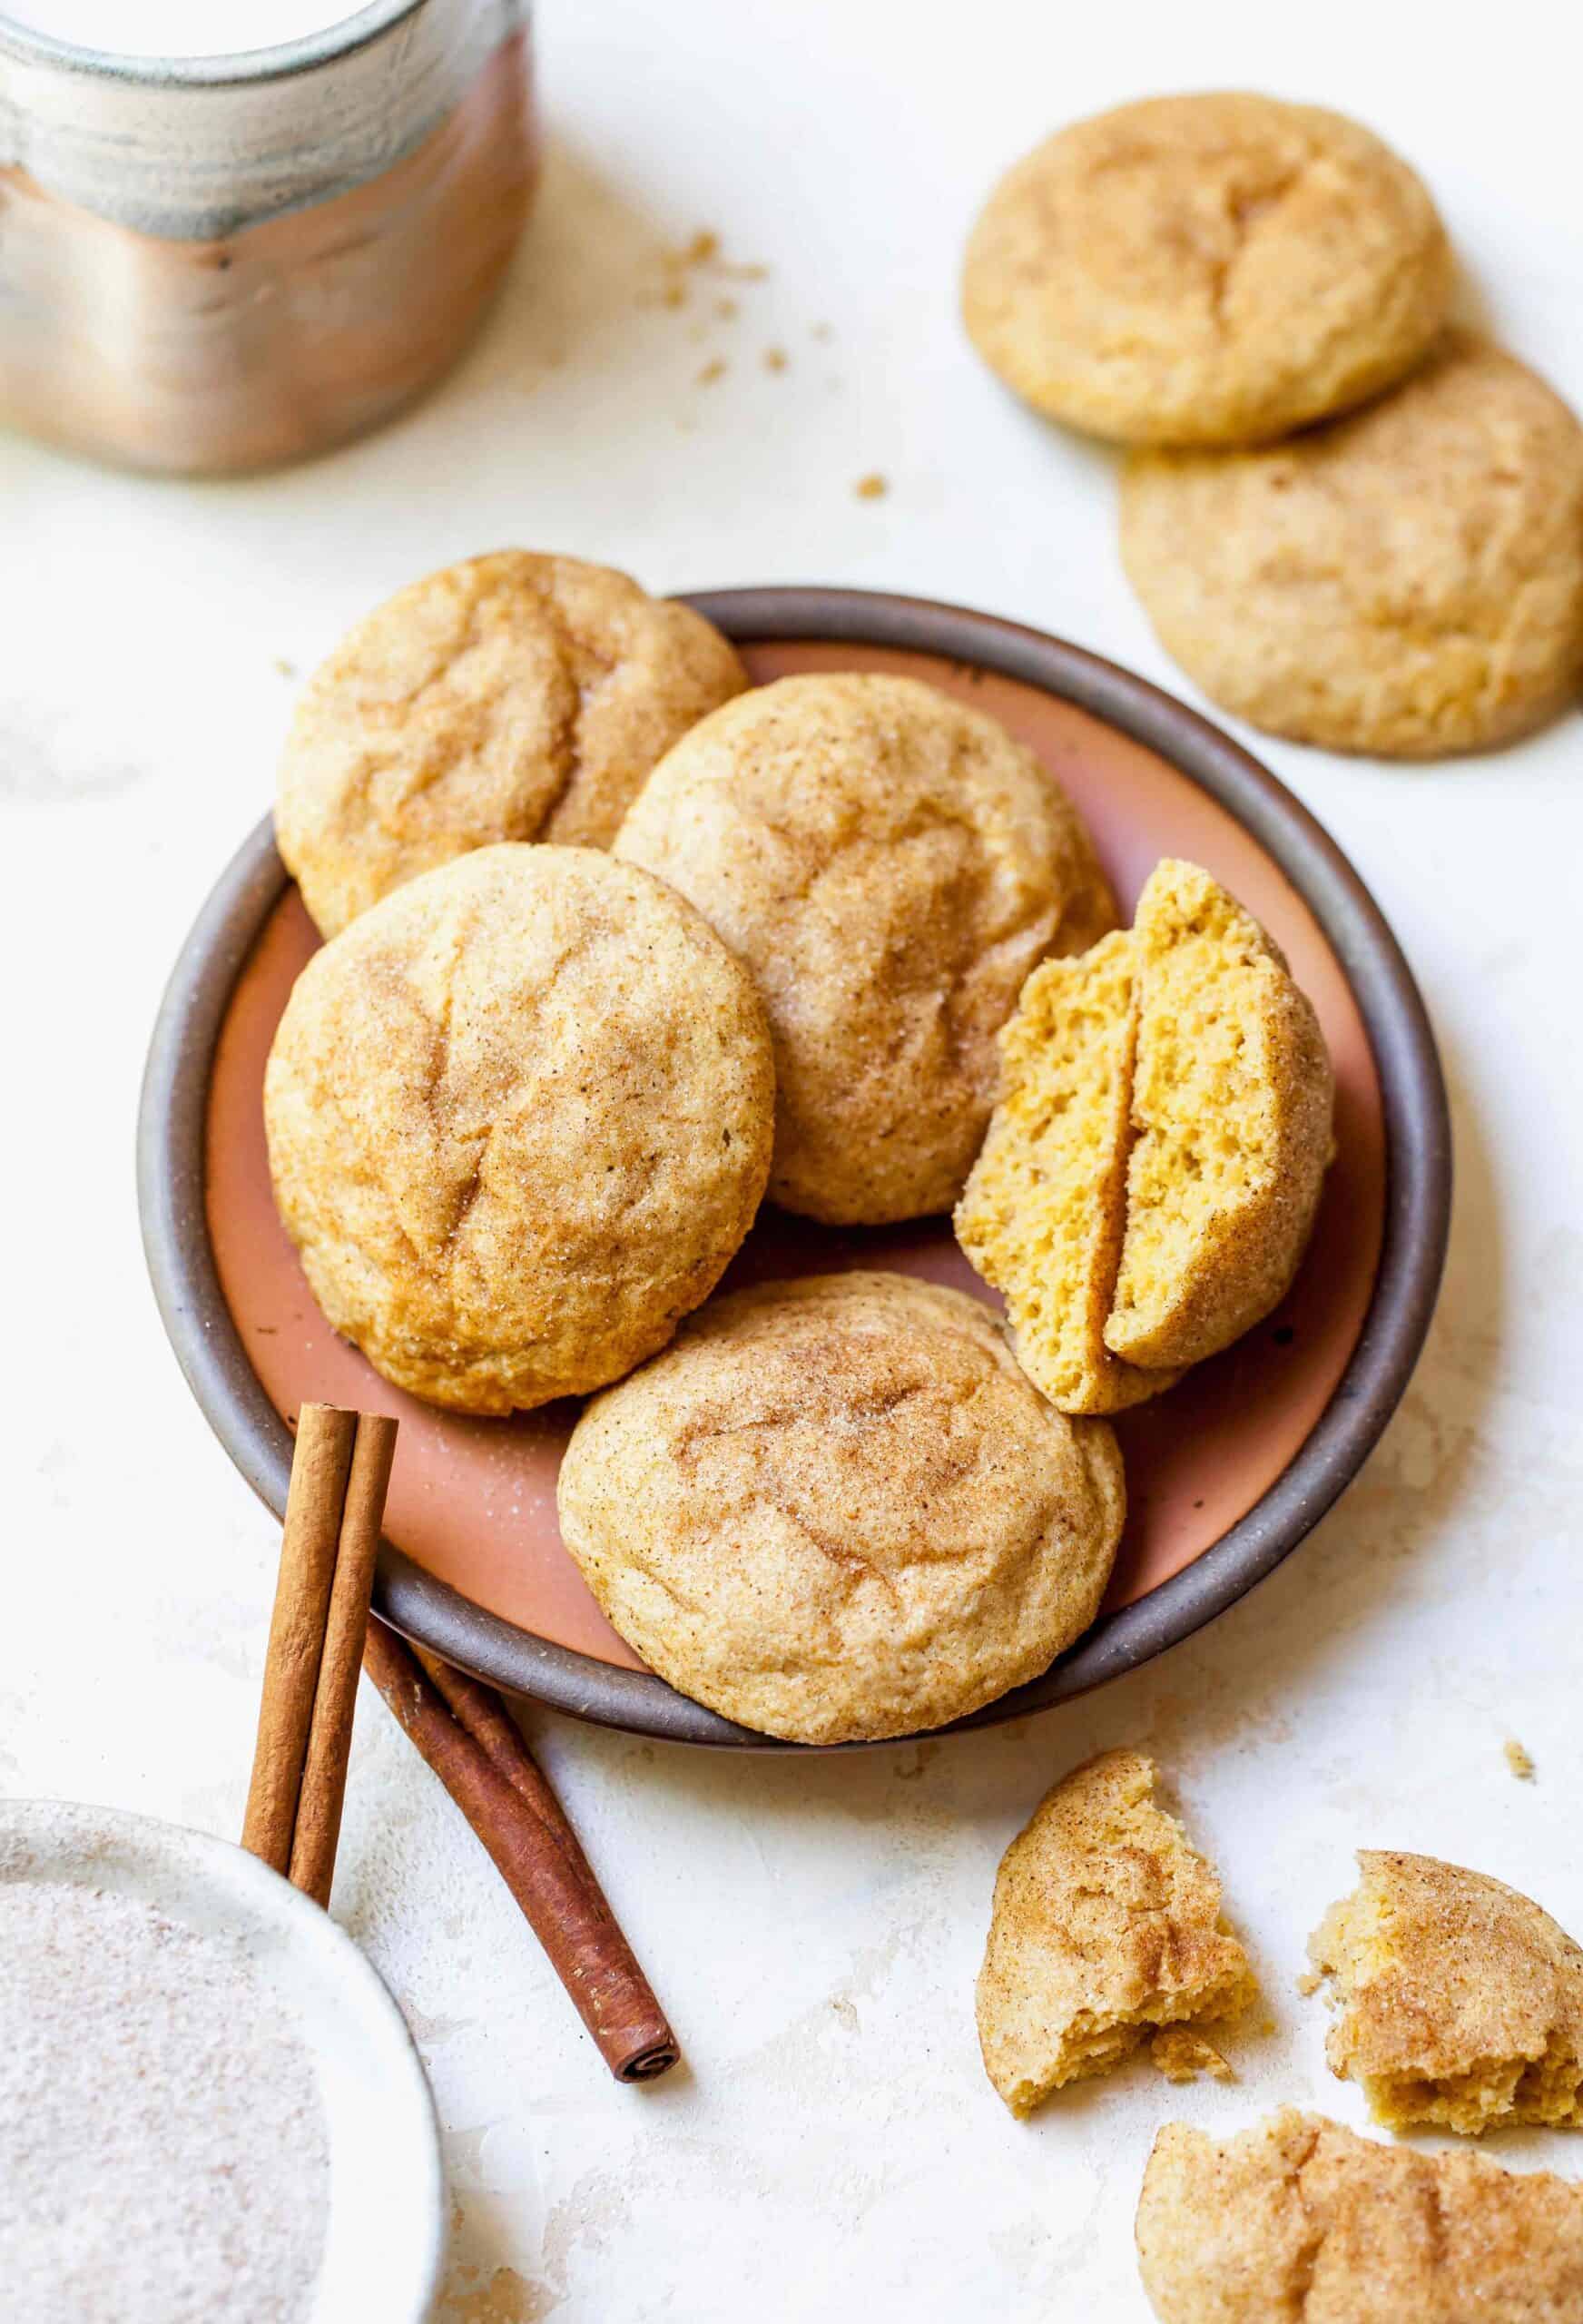 Pumpkin spice snickerdoodles are the perfect Fall dessert! They're a Fall twist on the classic snickerdoodle and absolutely heavenly!